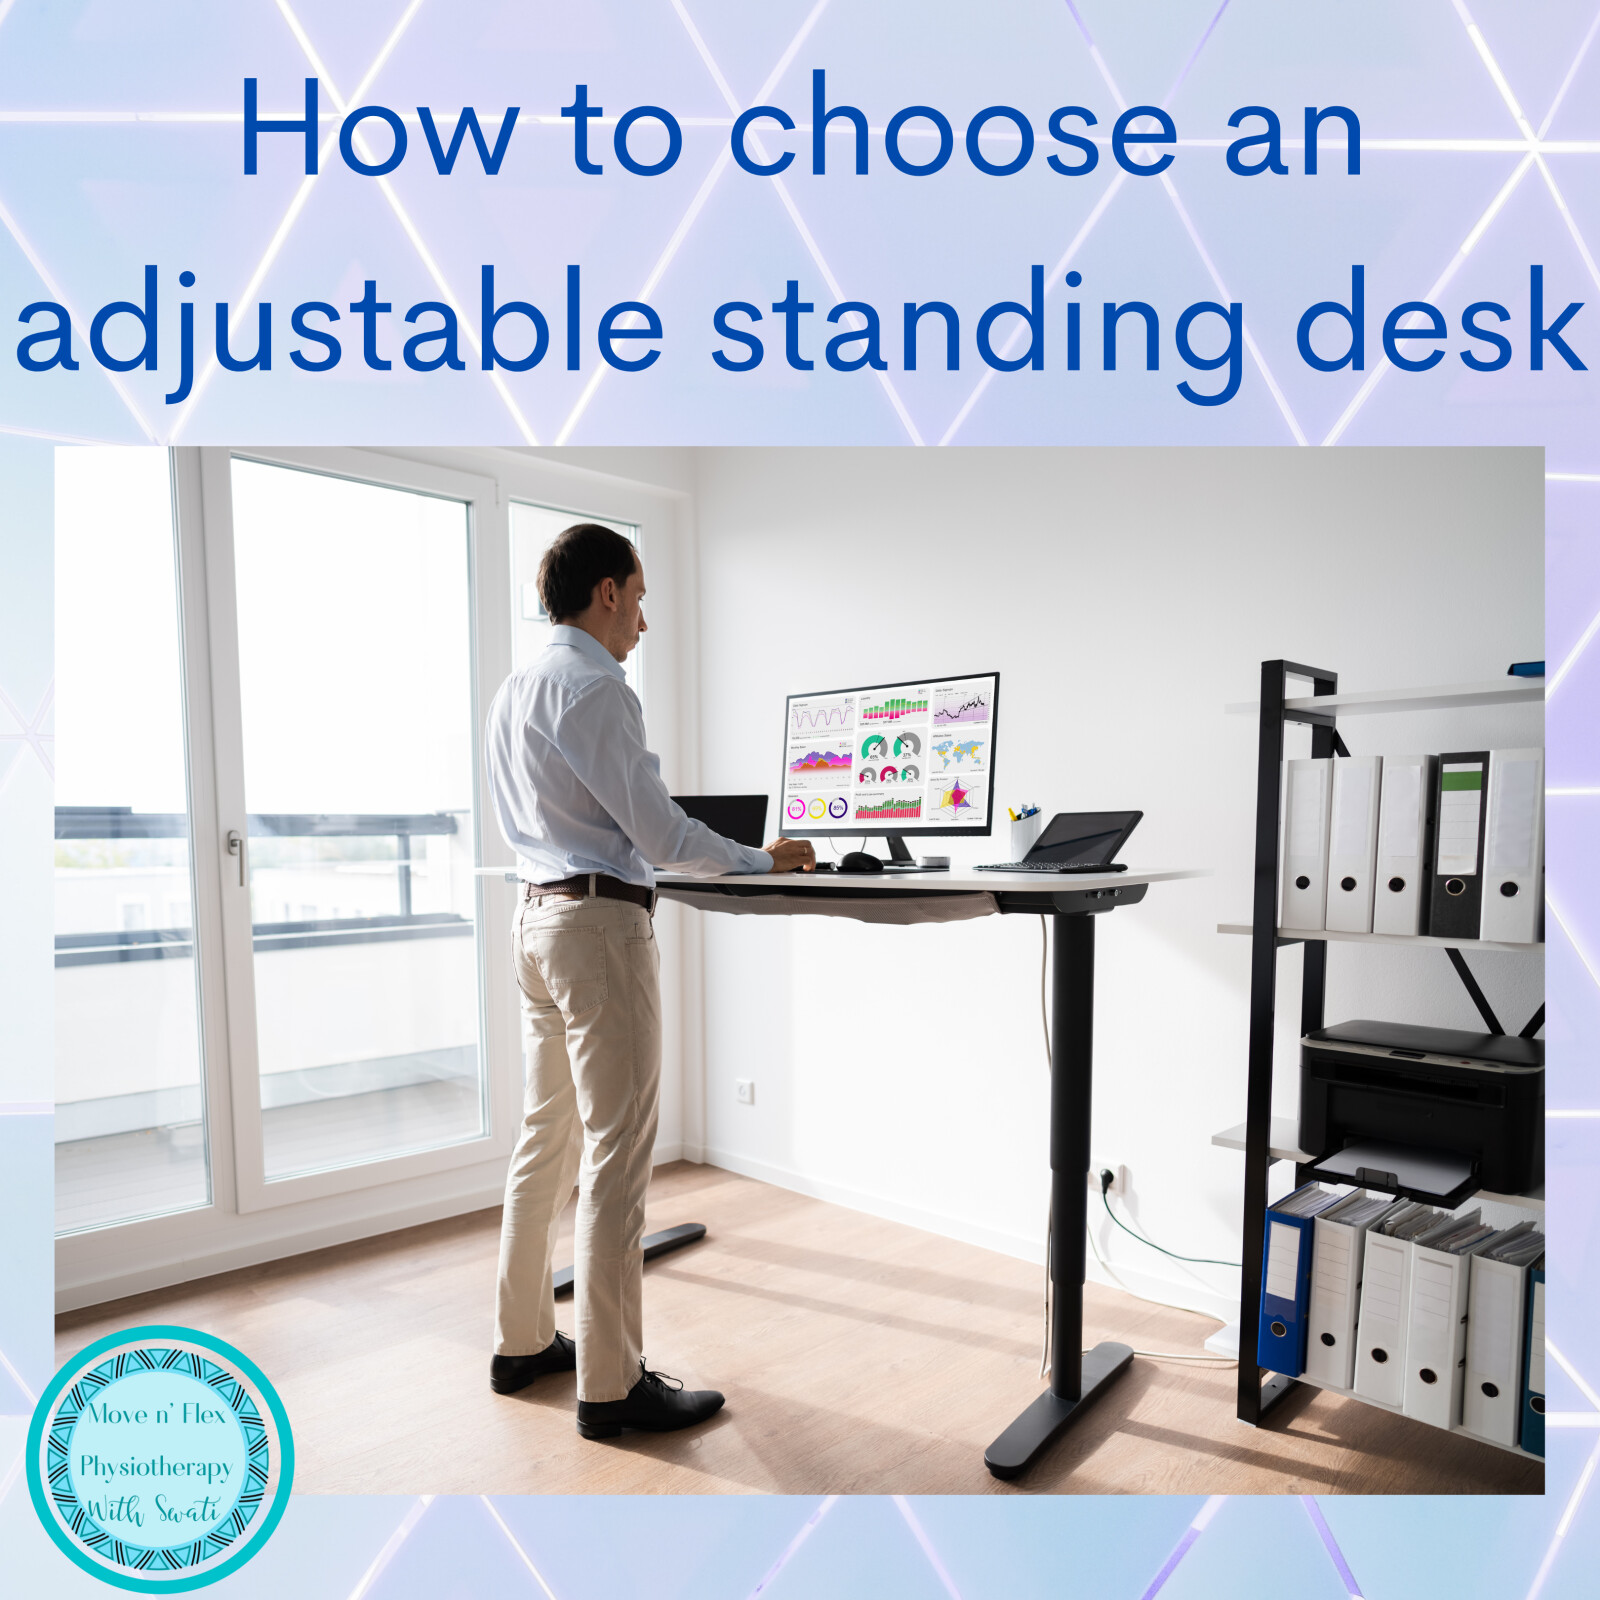 Ten features to look out for when choosing an Adjustable Standing desk